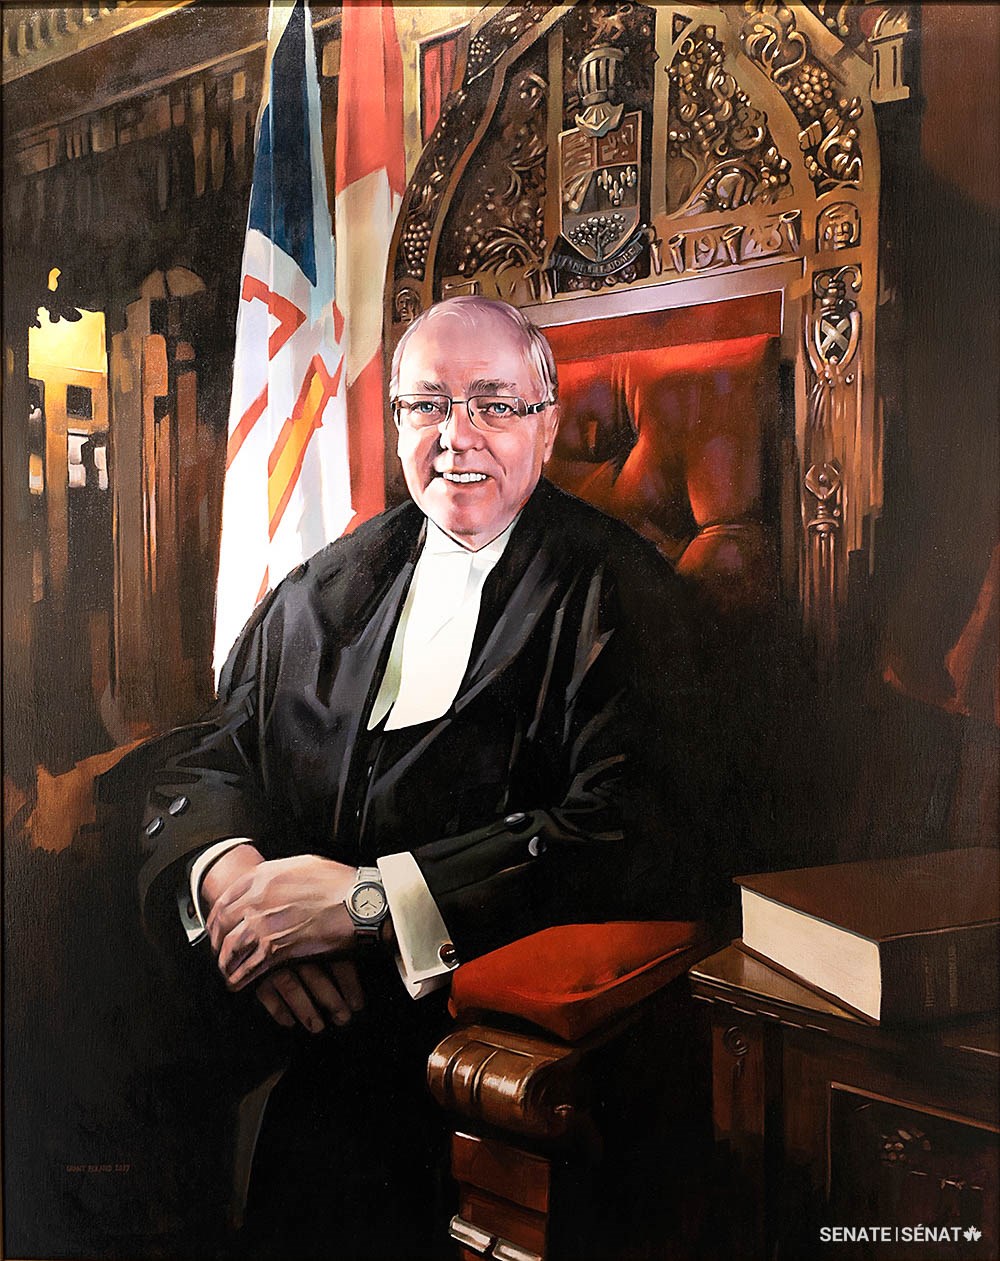 Artist Grant Boland included several references to Senator George J. Furey’s Newfoundland and Labrador roots in the Speaker’s portrait, including a book of the province’s history in the foreground and its flag in the background. (Grant Boland, 2018. Oil on canvas, H: 152 cm x W: 122cm, Senate Artwork and Heritage Collection)